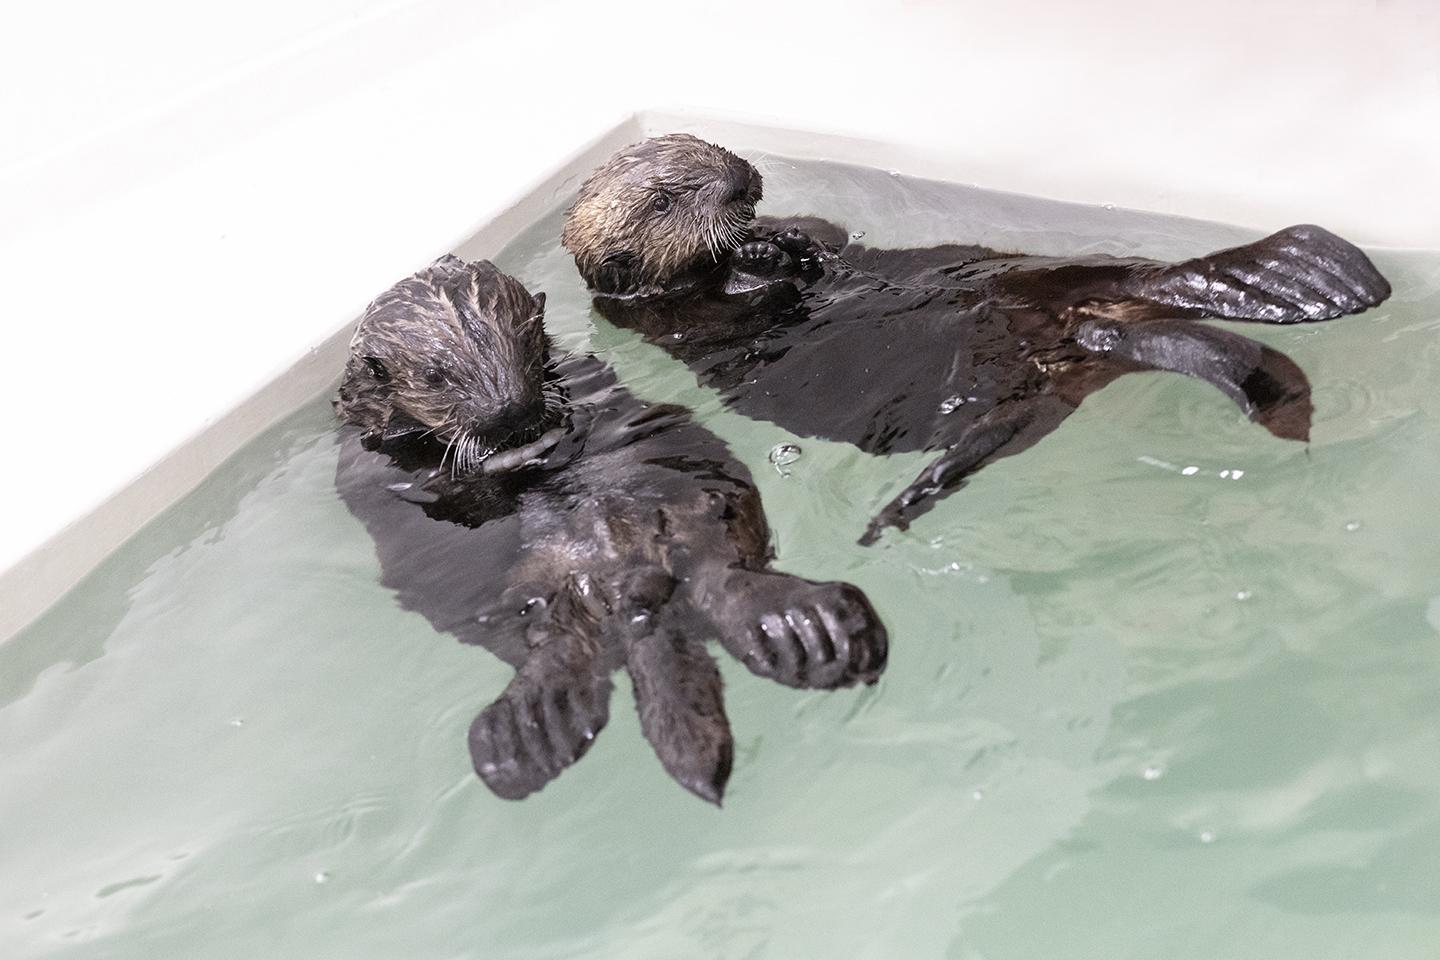 Two southern sea otter pups arrived at Shedd Aquarium in July after being rescued in California. (Brenna Hernandez / Shedd Aquarium)